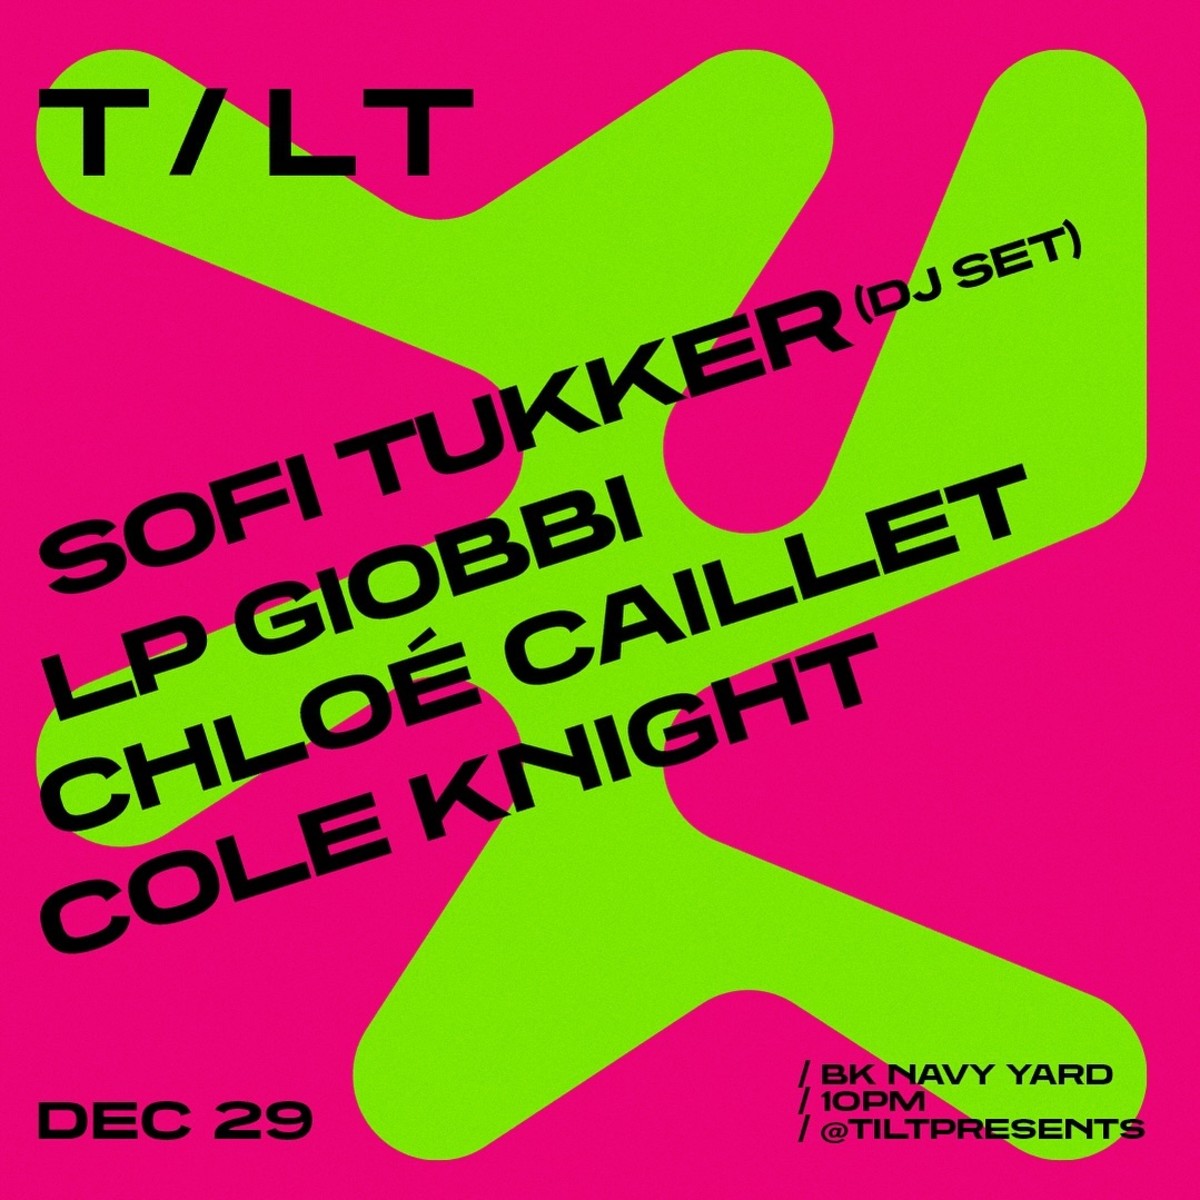 The launch of "T / L T" will feature SOFI TUKKER, LP Giobbi, Chloé Caillet and Cole Knight.